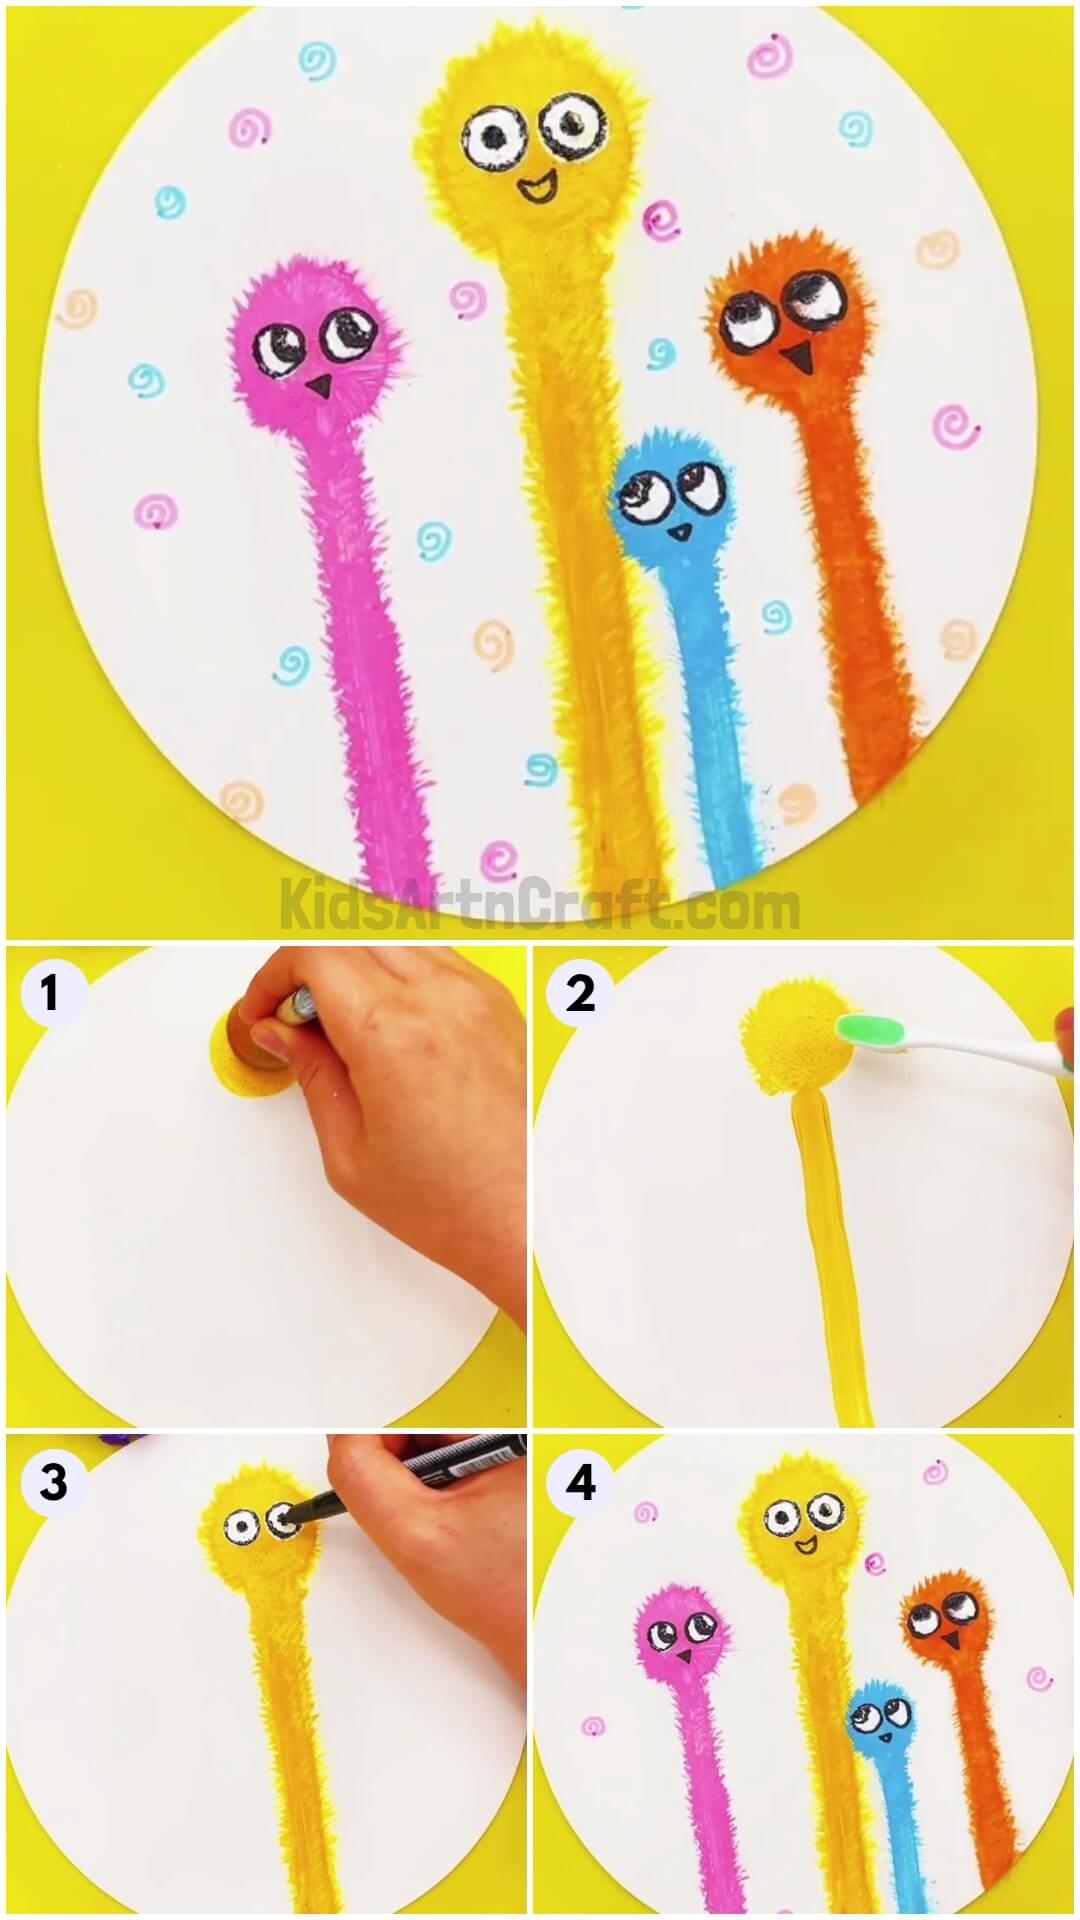 Adorable Worry Worms Painting Step-by-step Tutorial